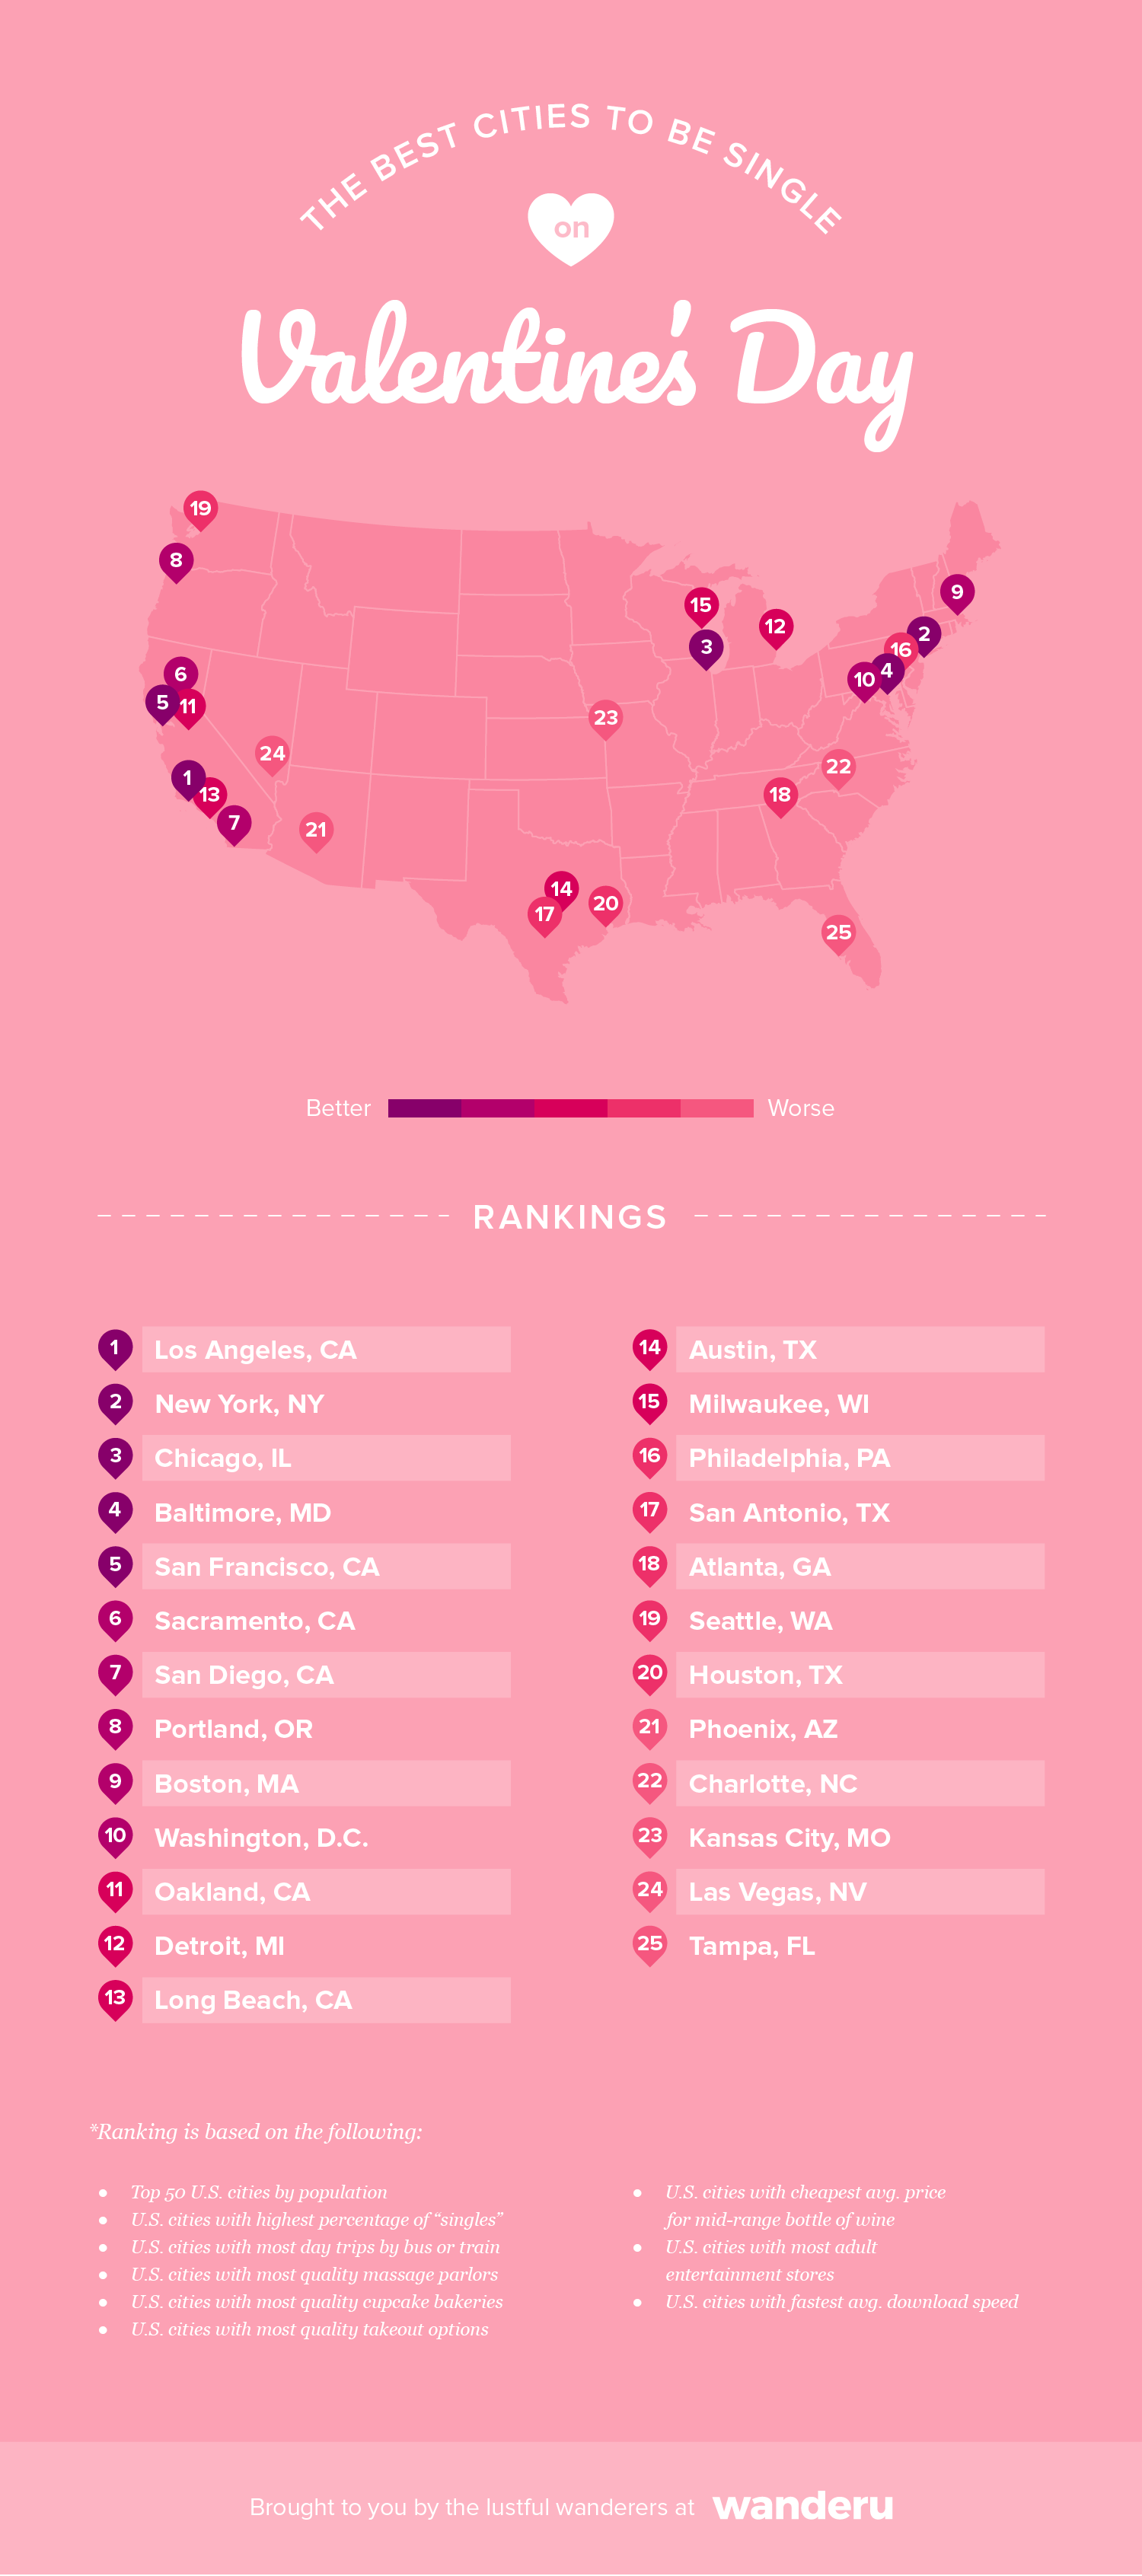 Pink map ranking the top 25 cities for singles on Valentine's Day.